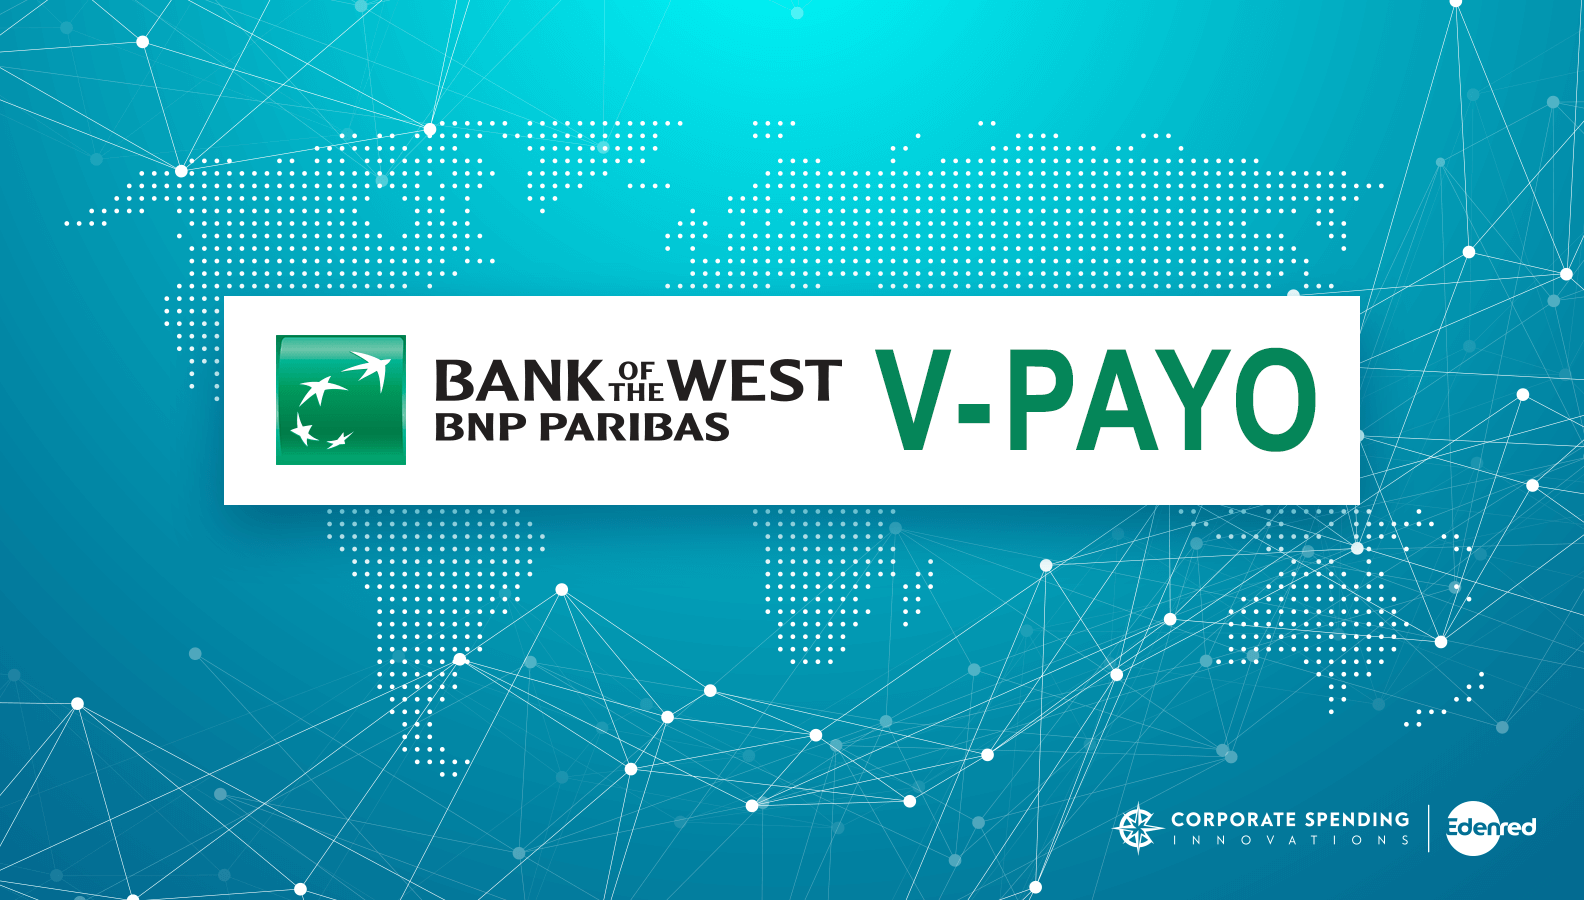 Bank of the West — V-PAYO